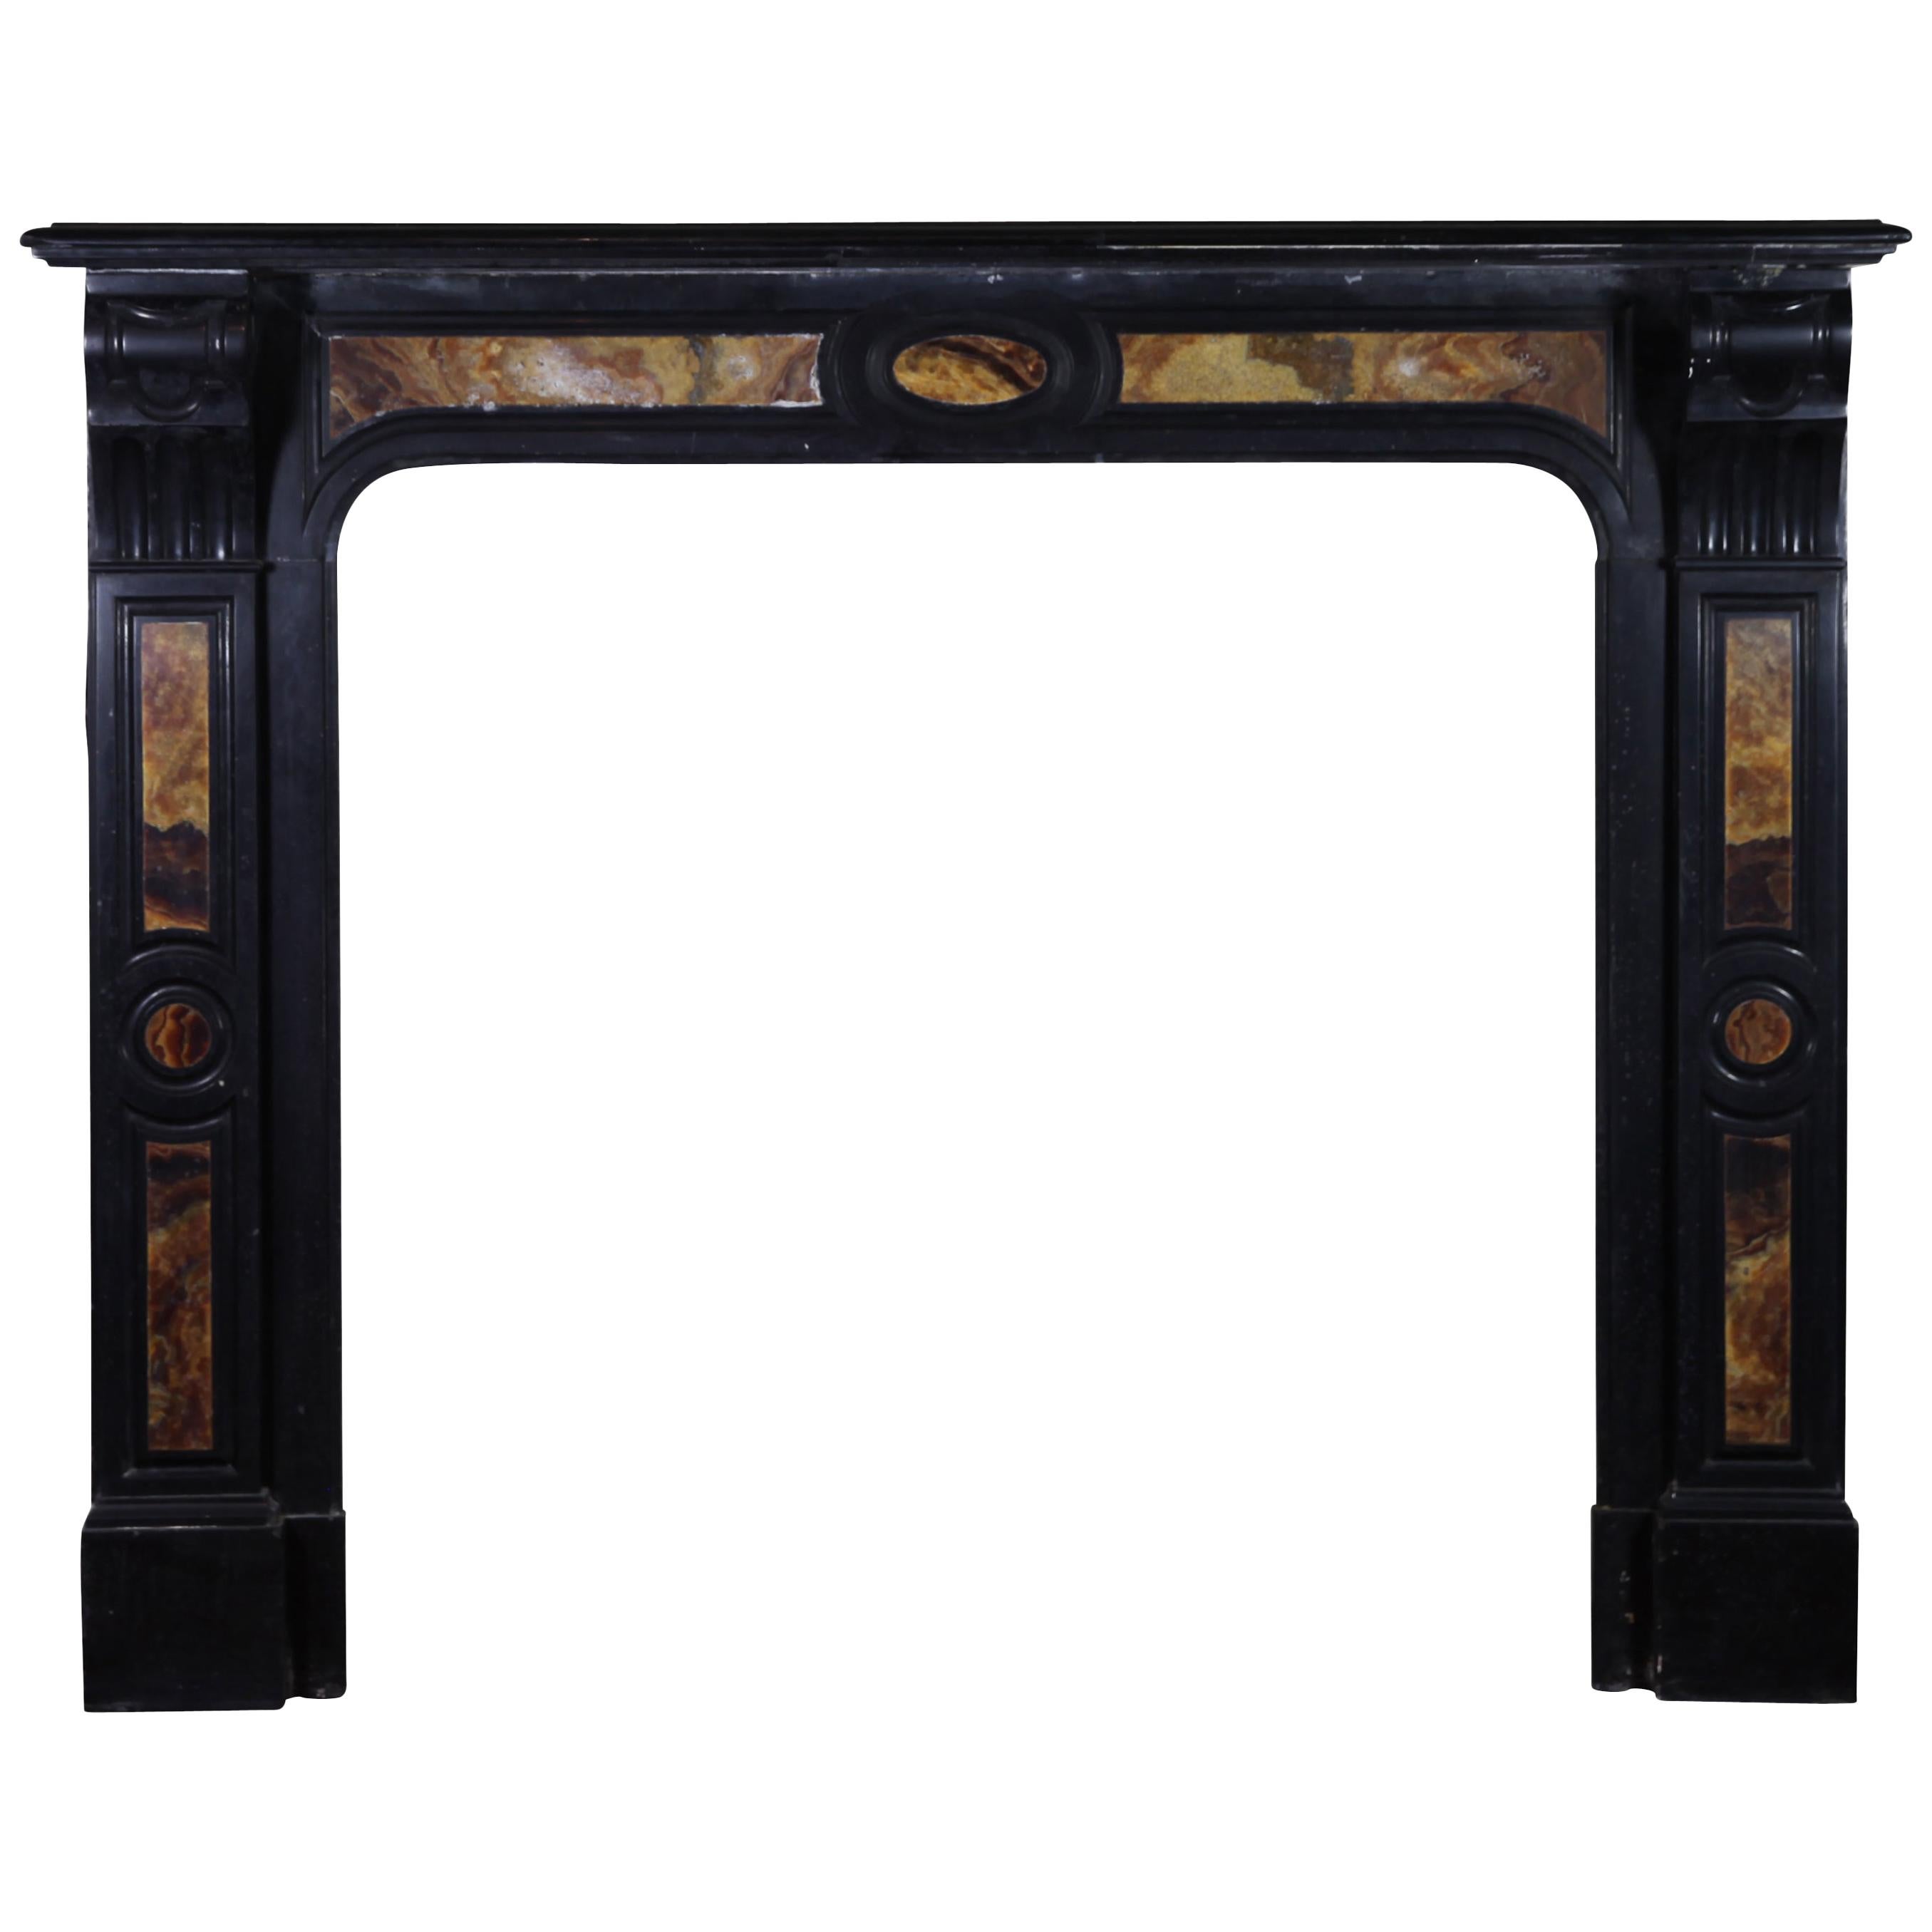 Black Belgian Marble and Onyx Decorative Vintage Fireplace Surround For Sale